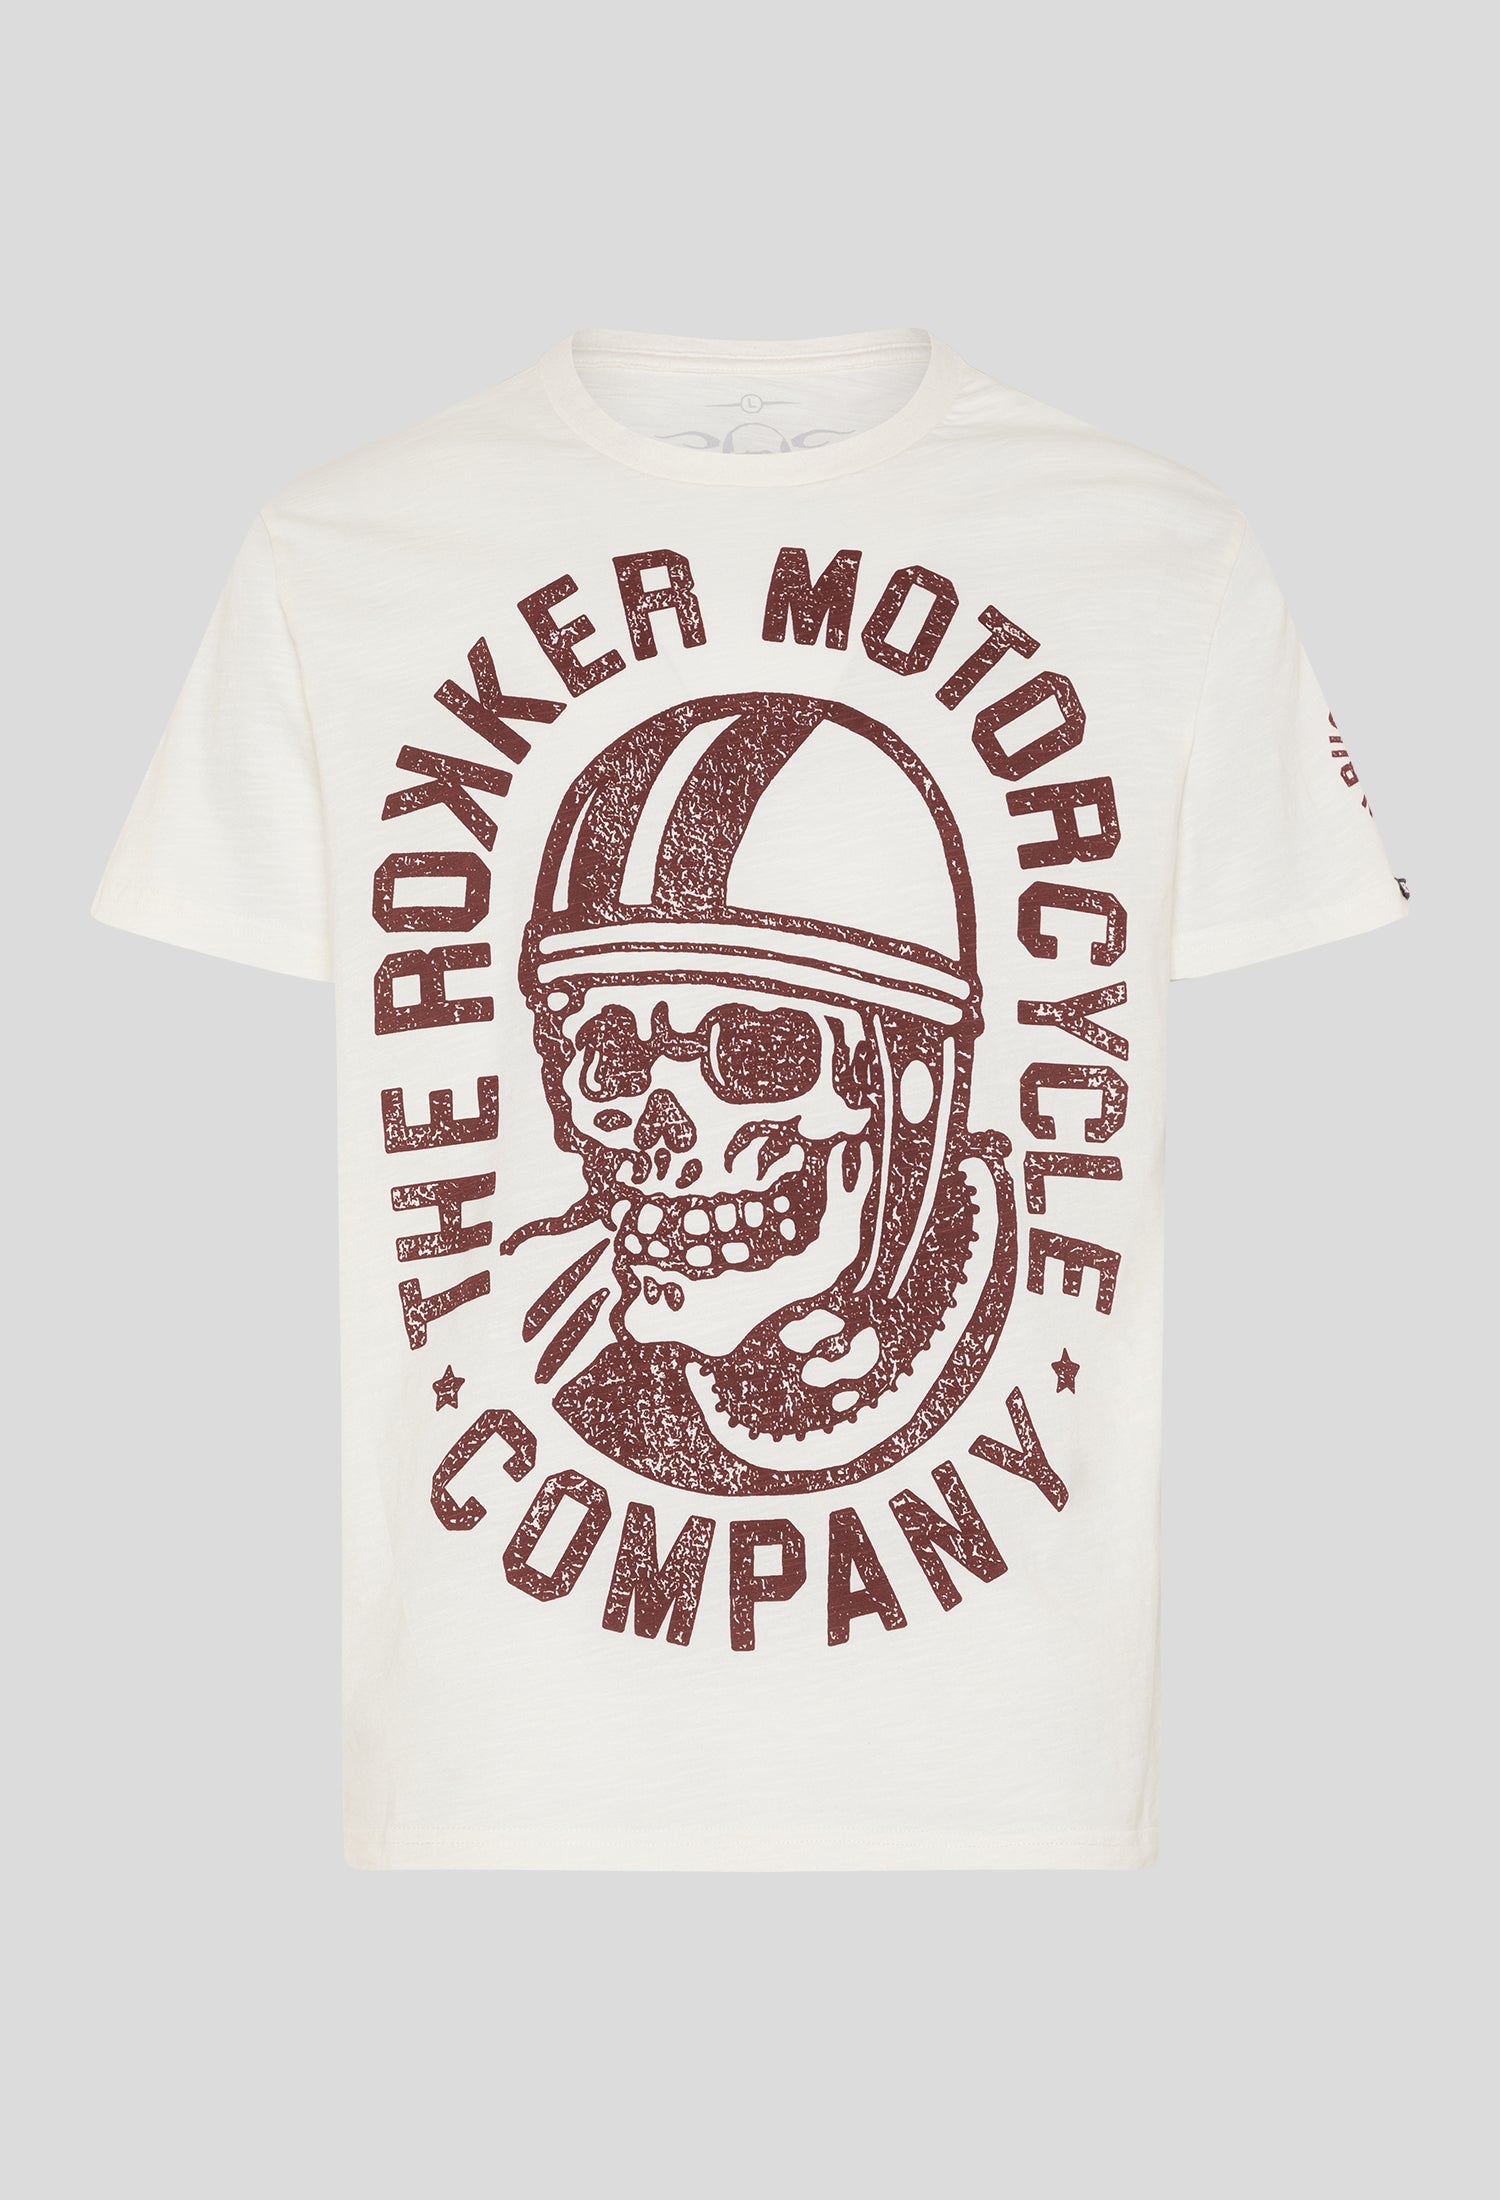 MOTORCYCLE 77 CO. T-SHIRT white